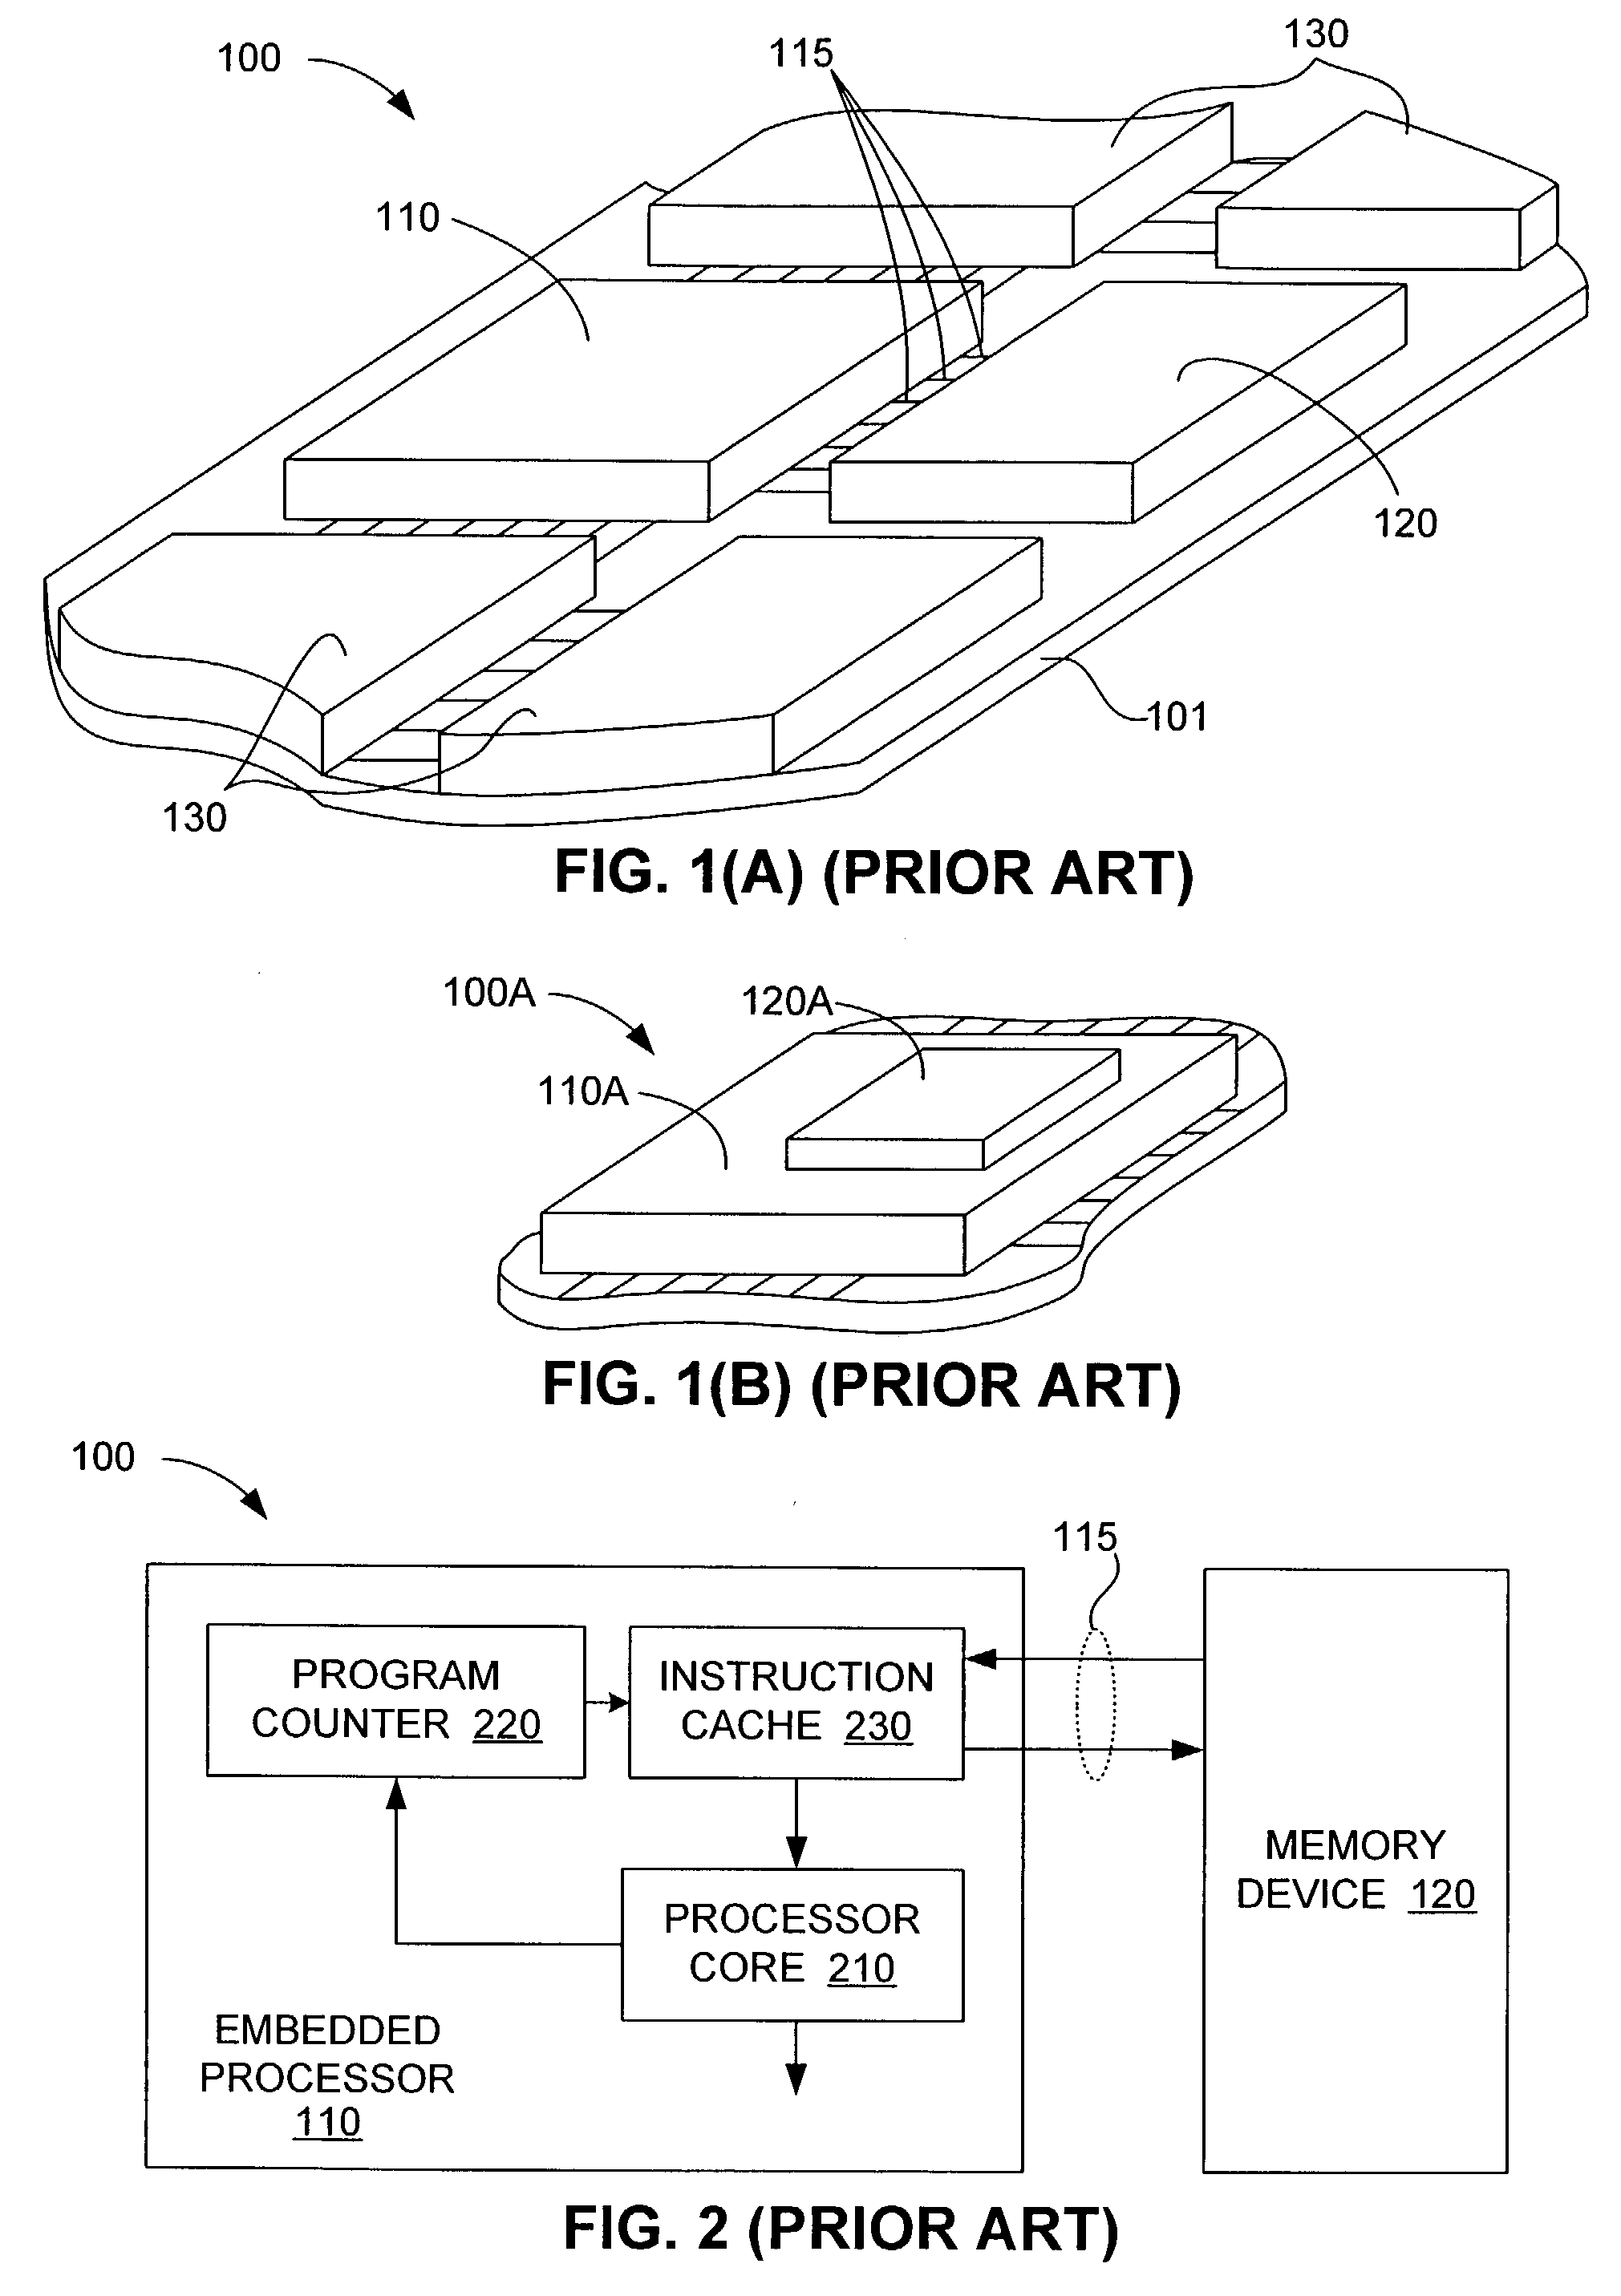 Multi-threaded embedded processor using deterministic instruction memory to guarantee execution of pre-selected threads during blocking events